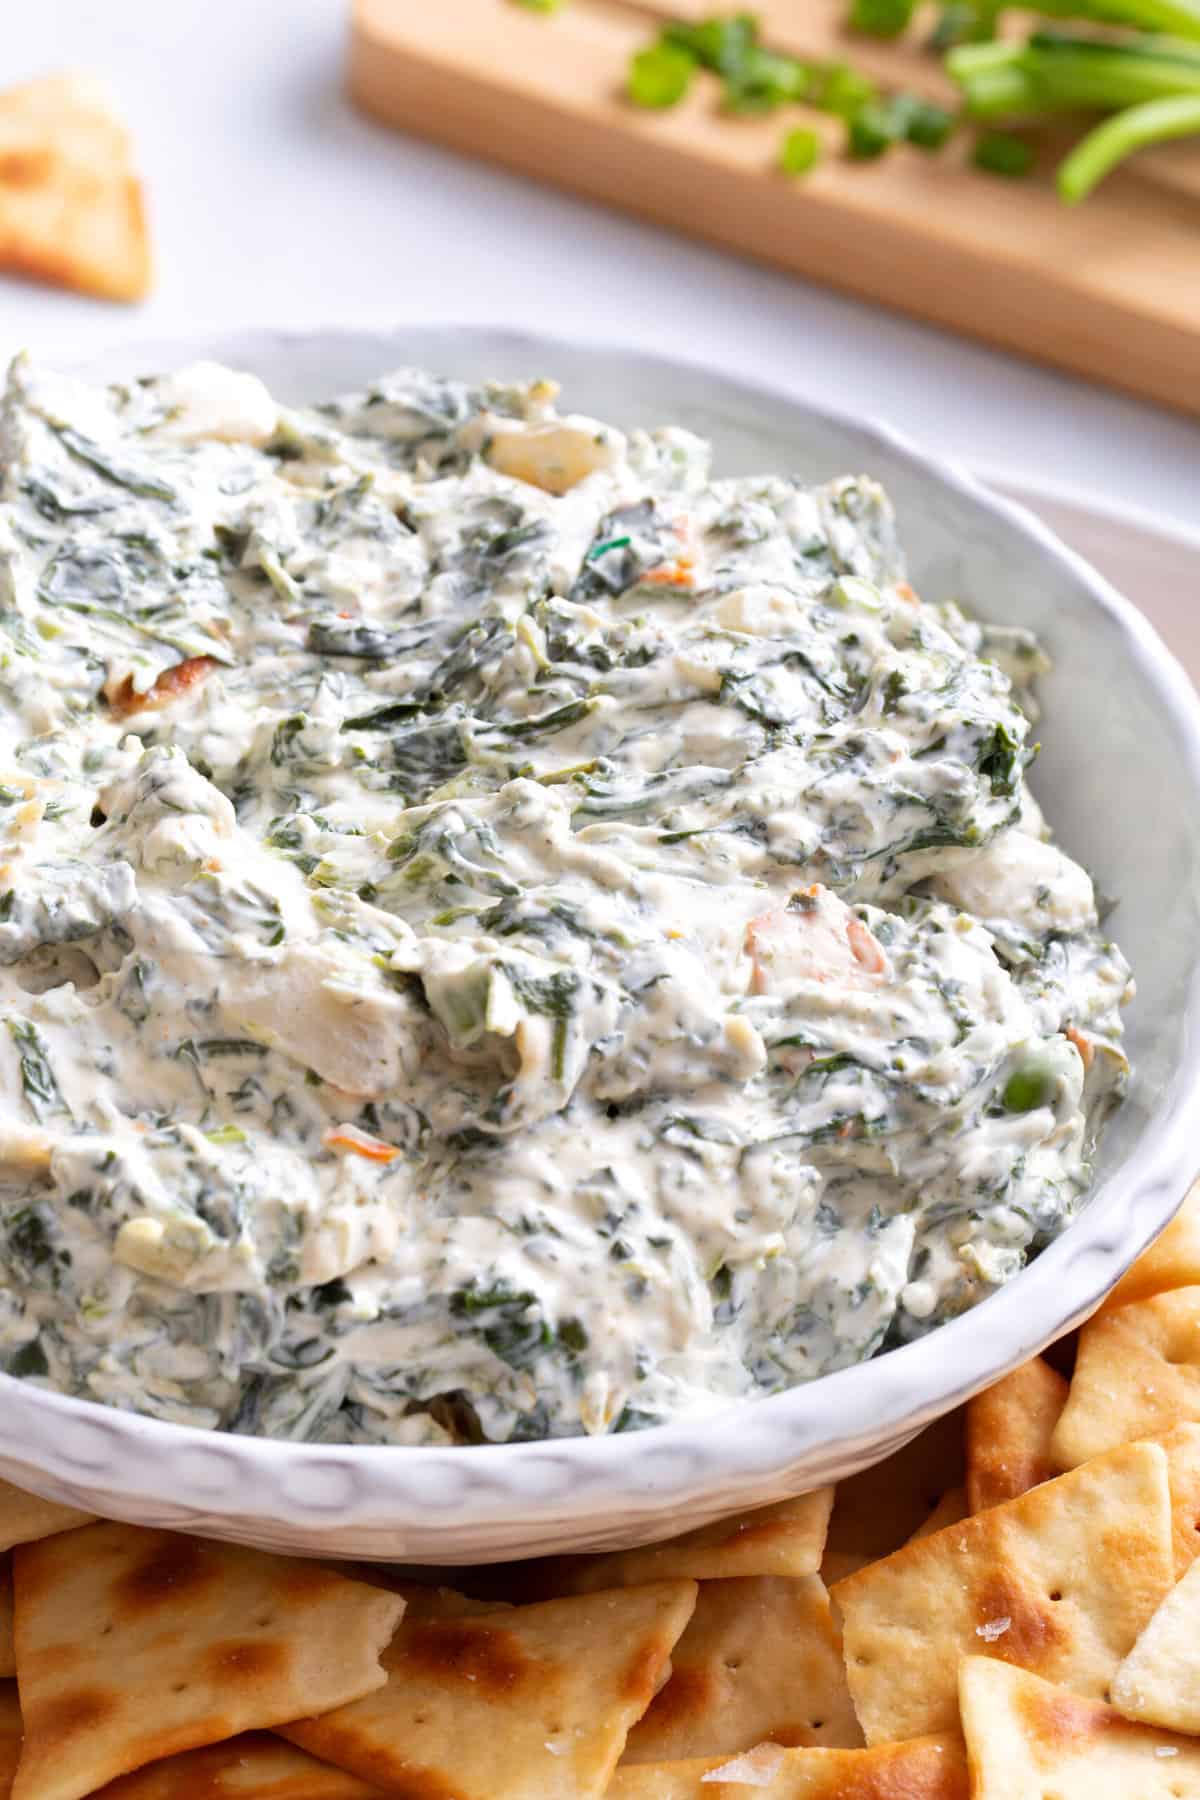 close up image of a bowl of spinach dip with a side of triangle shaped pita chips